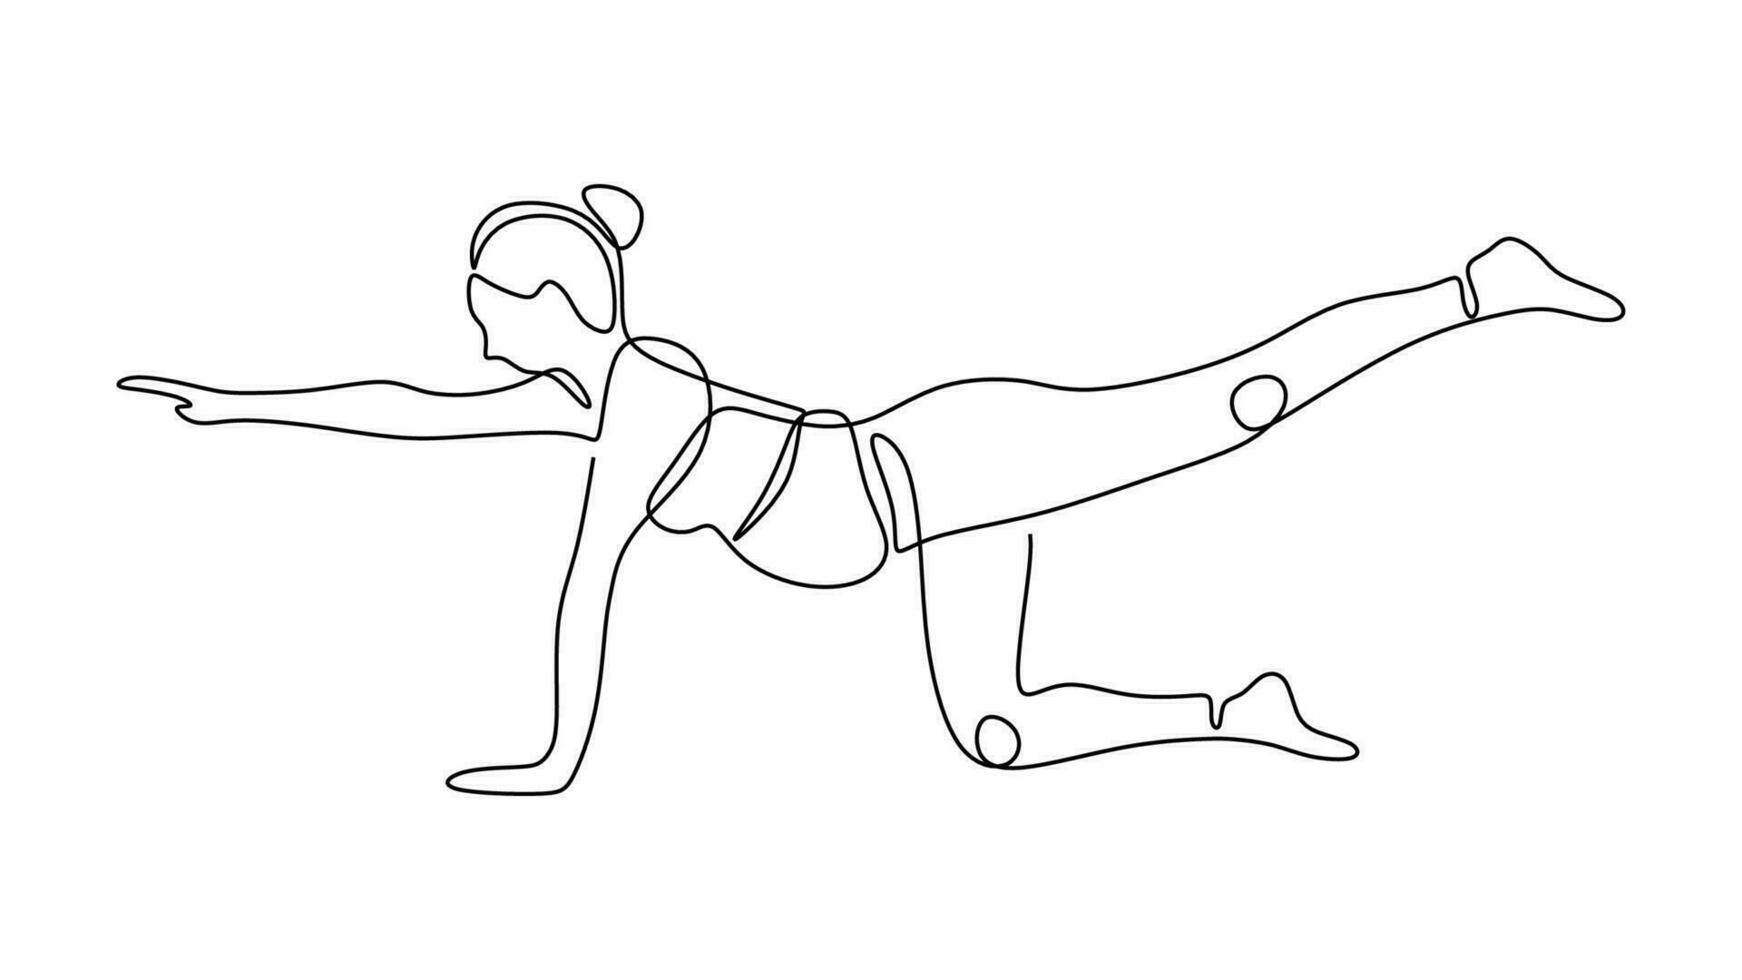 Pregnancy yoga, continuous one line drawing. Sketch art illustration vector